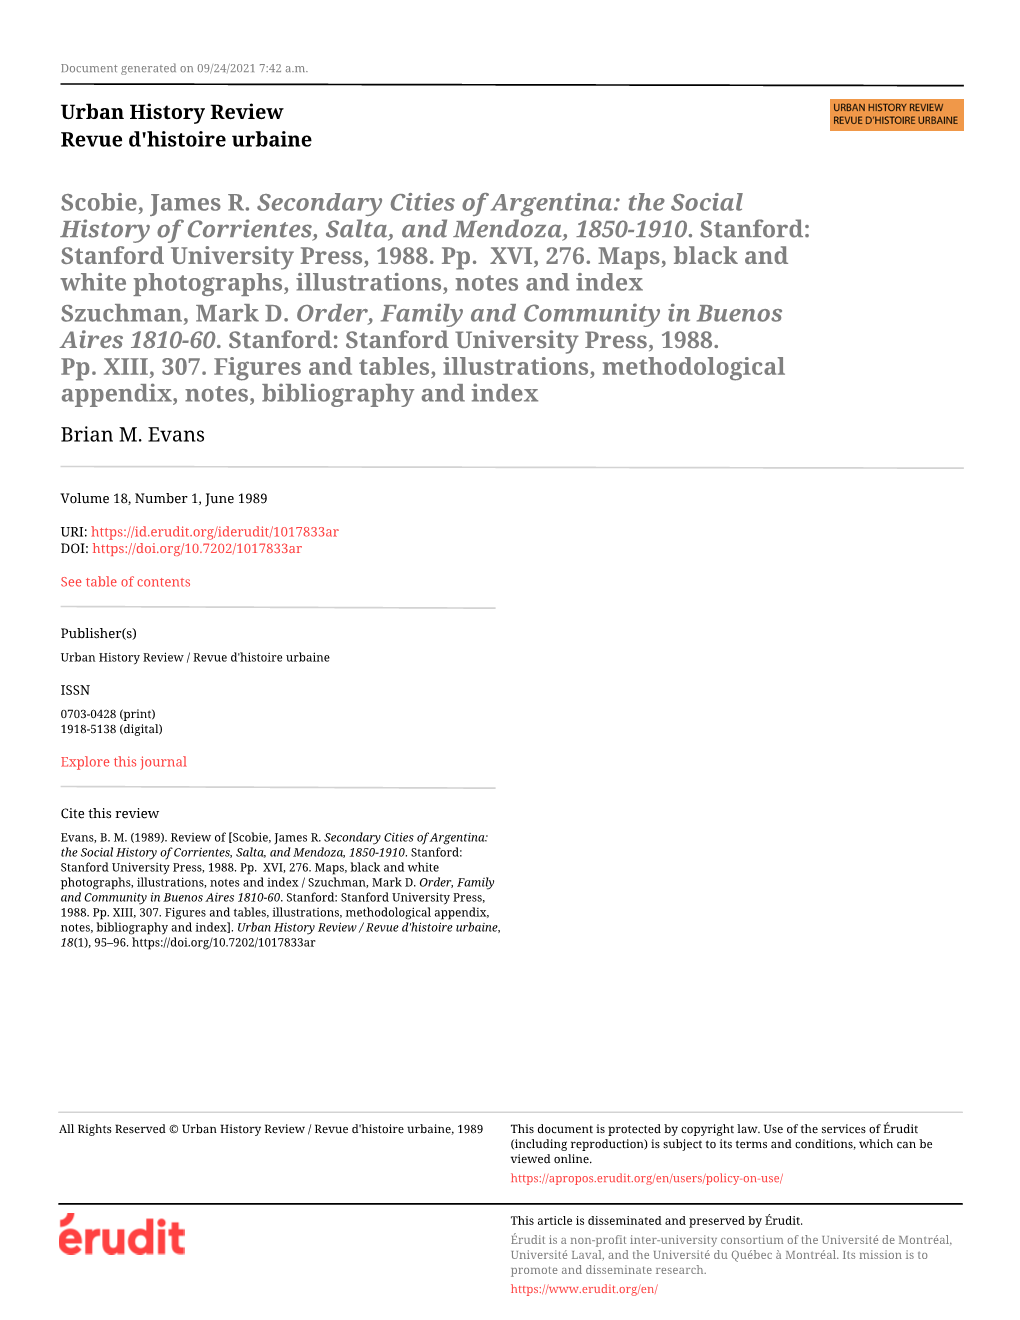 Scobie, James R. Secondary Cities of Argentina: the Social History of Corrientes, Salta, and Mendoza, 1850-1910